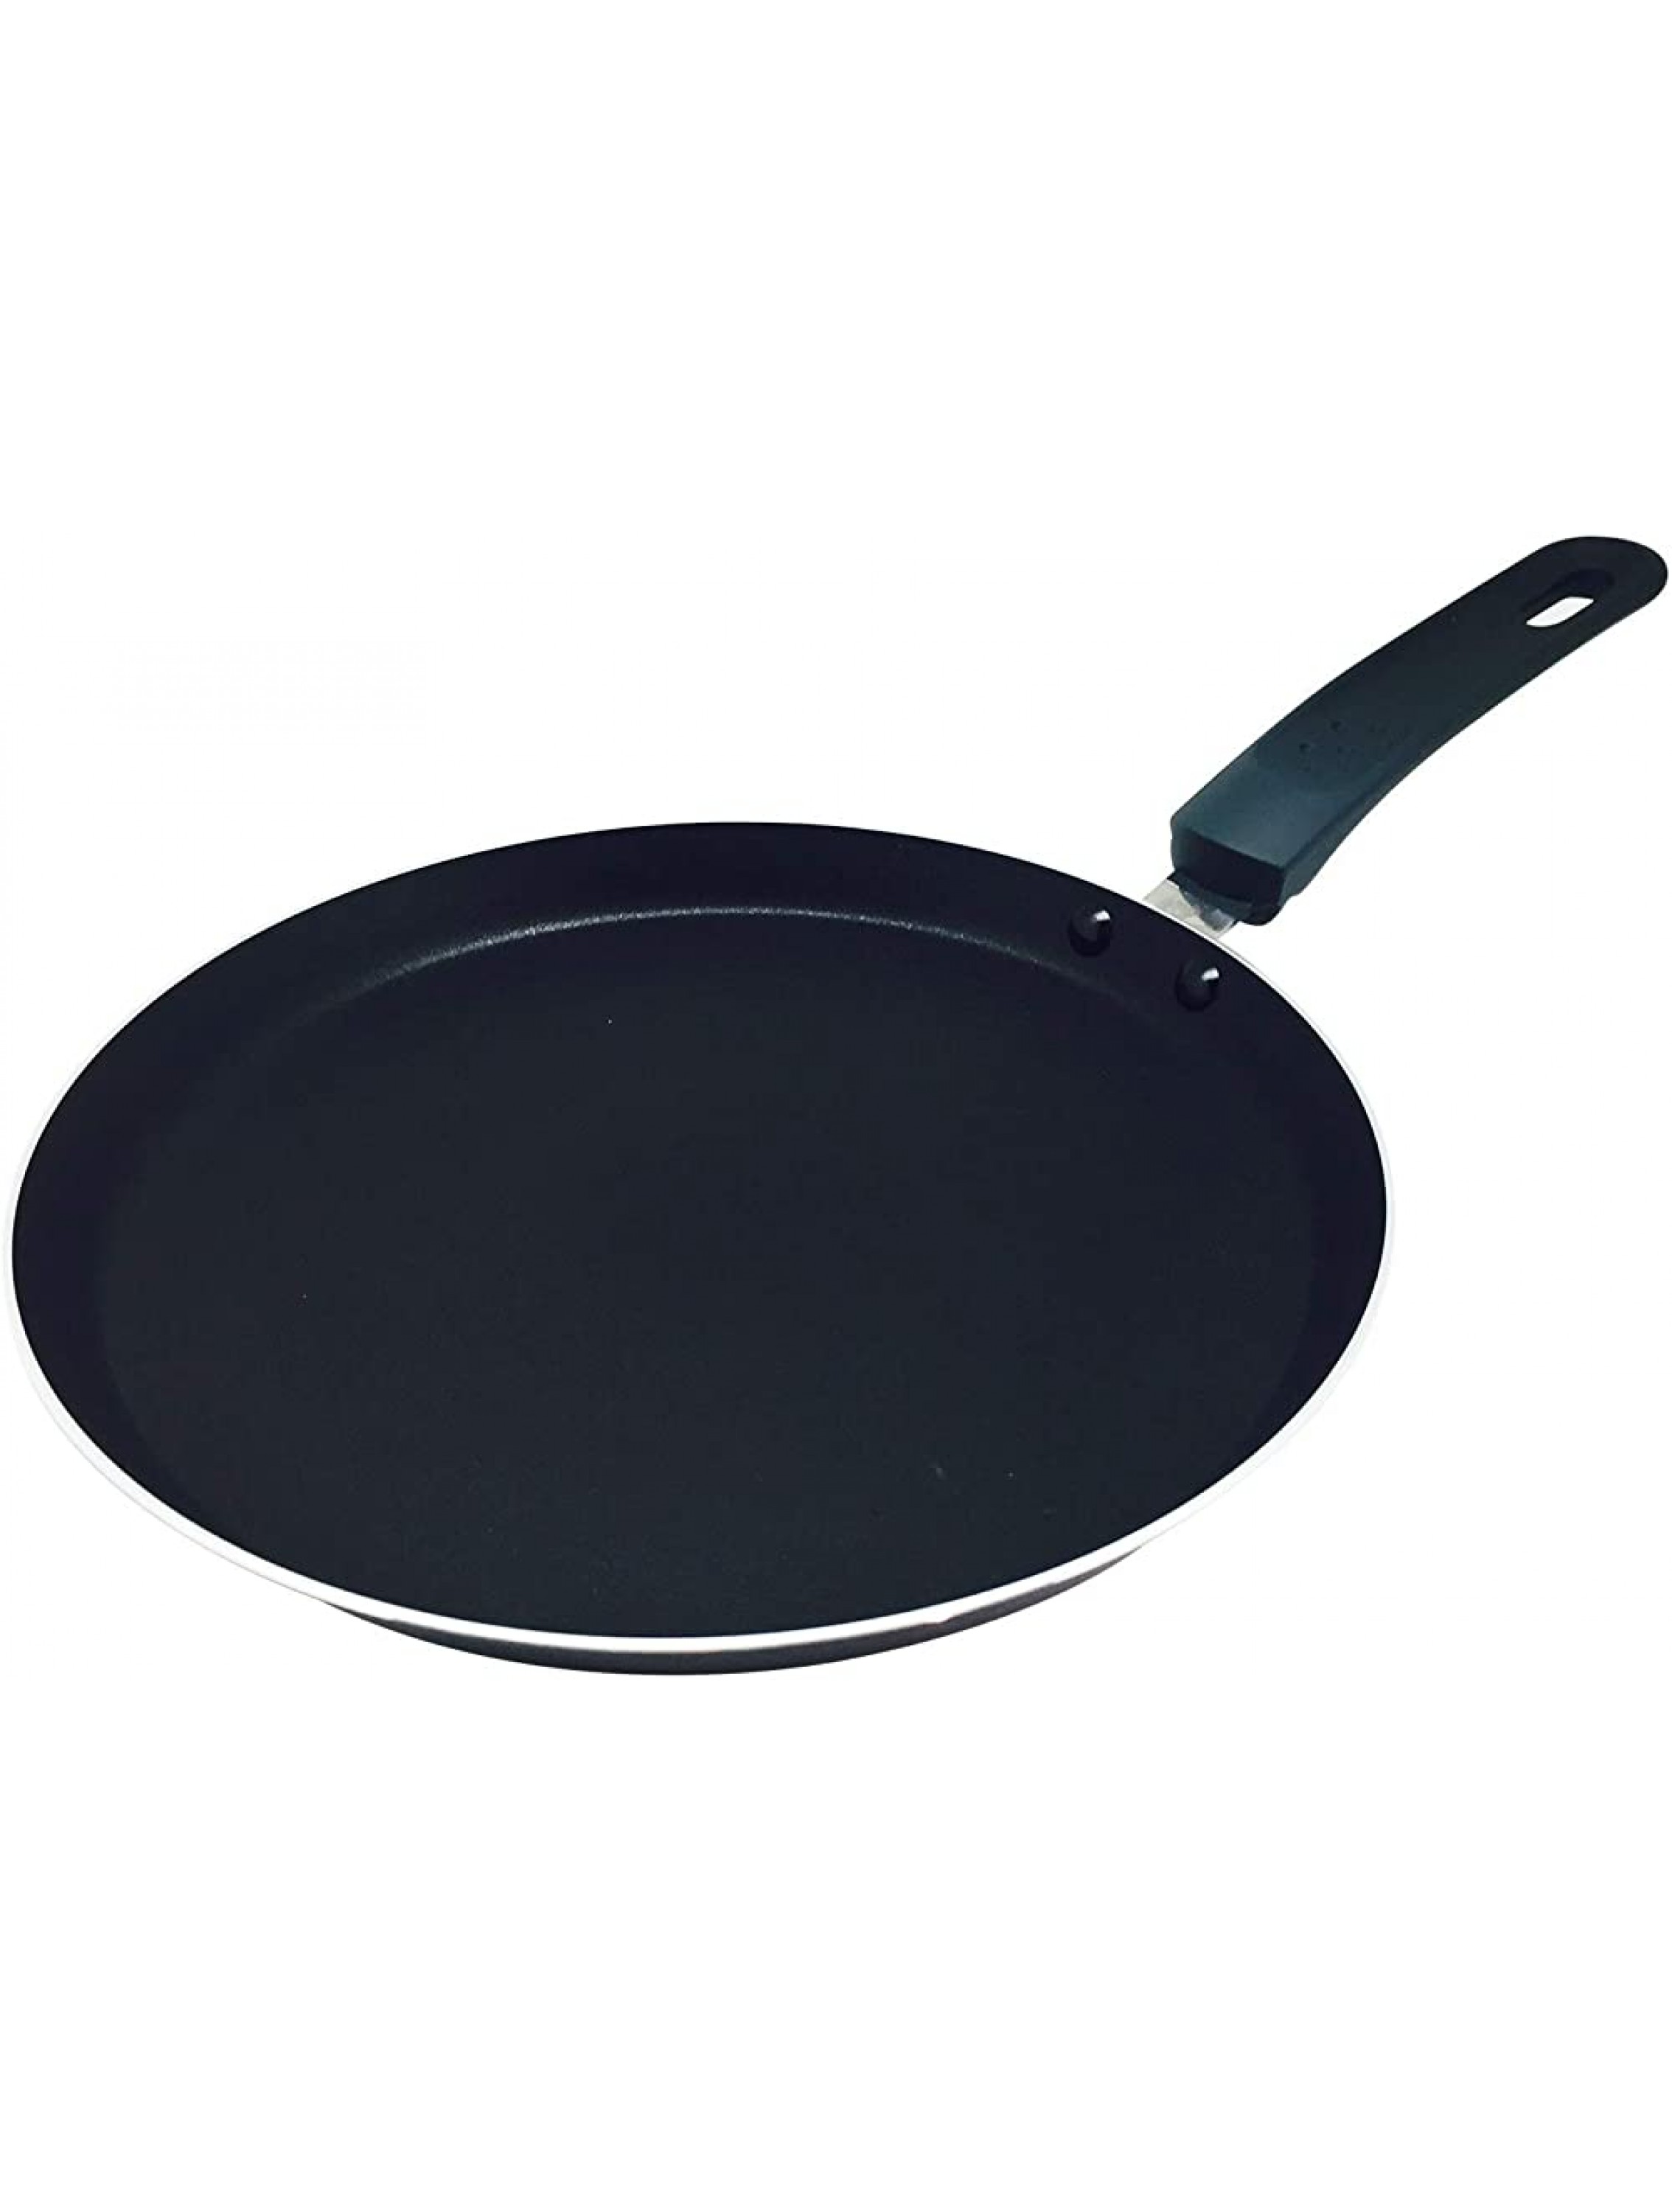 Pancake Omelette Pan by Ricovero Cookware- Double Nonstick Crepe Pan Light Weight Ergonomic Handle Uniform Heat Distribution Dishwasher Safe 8.70 inches Grey - BXM7M905A